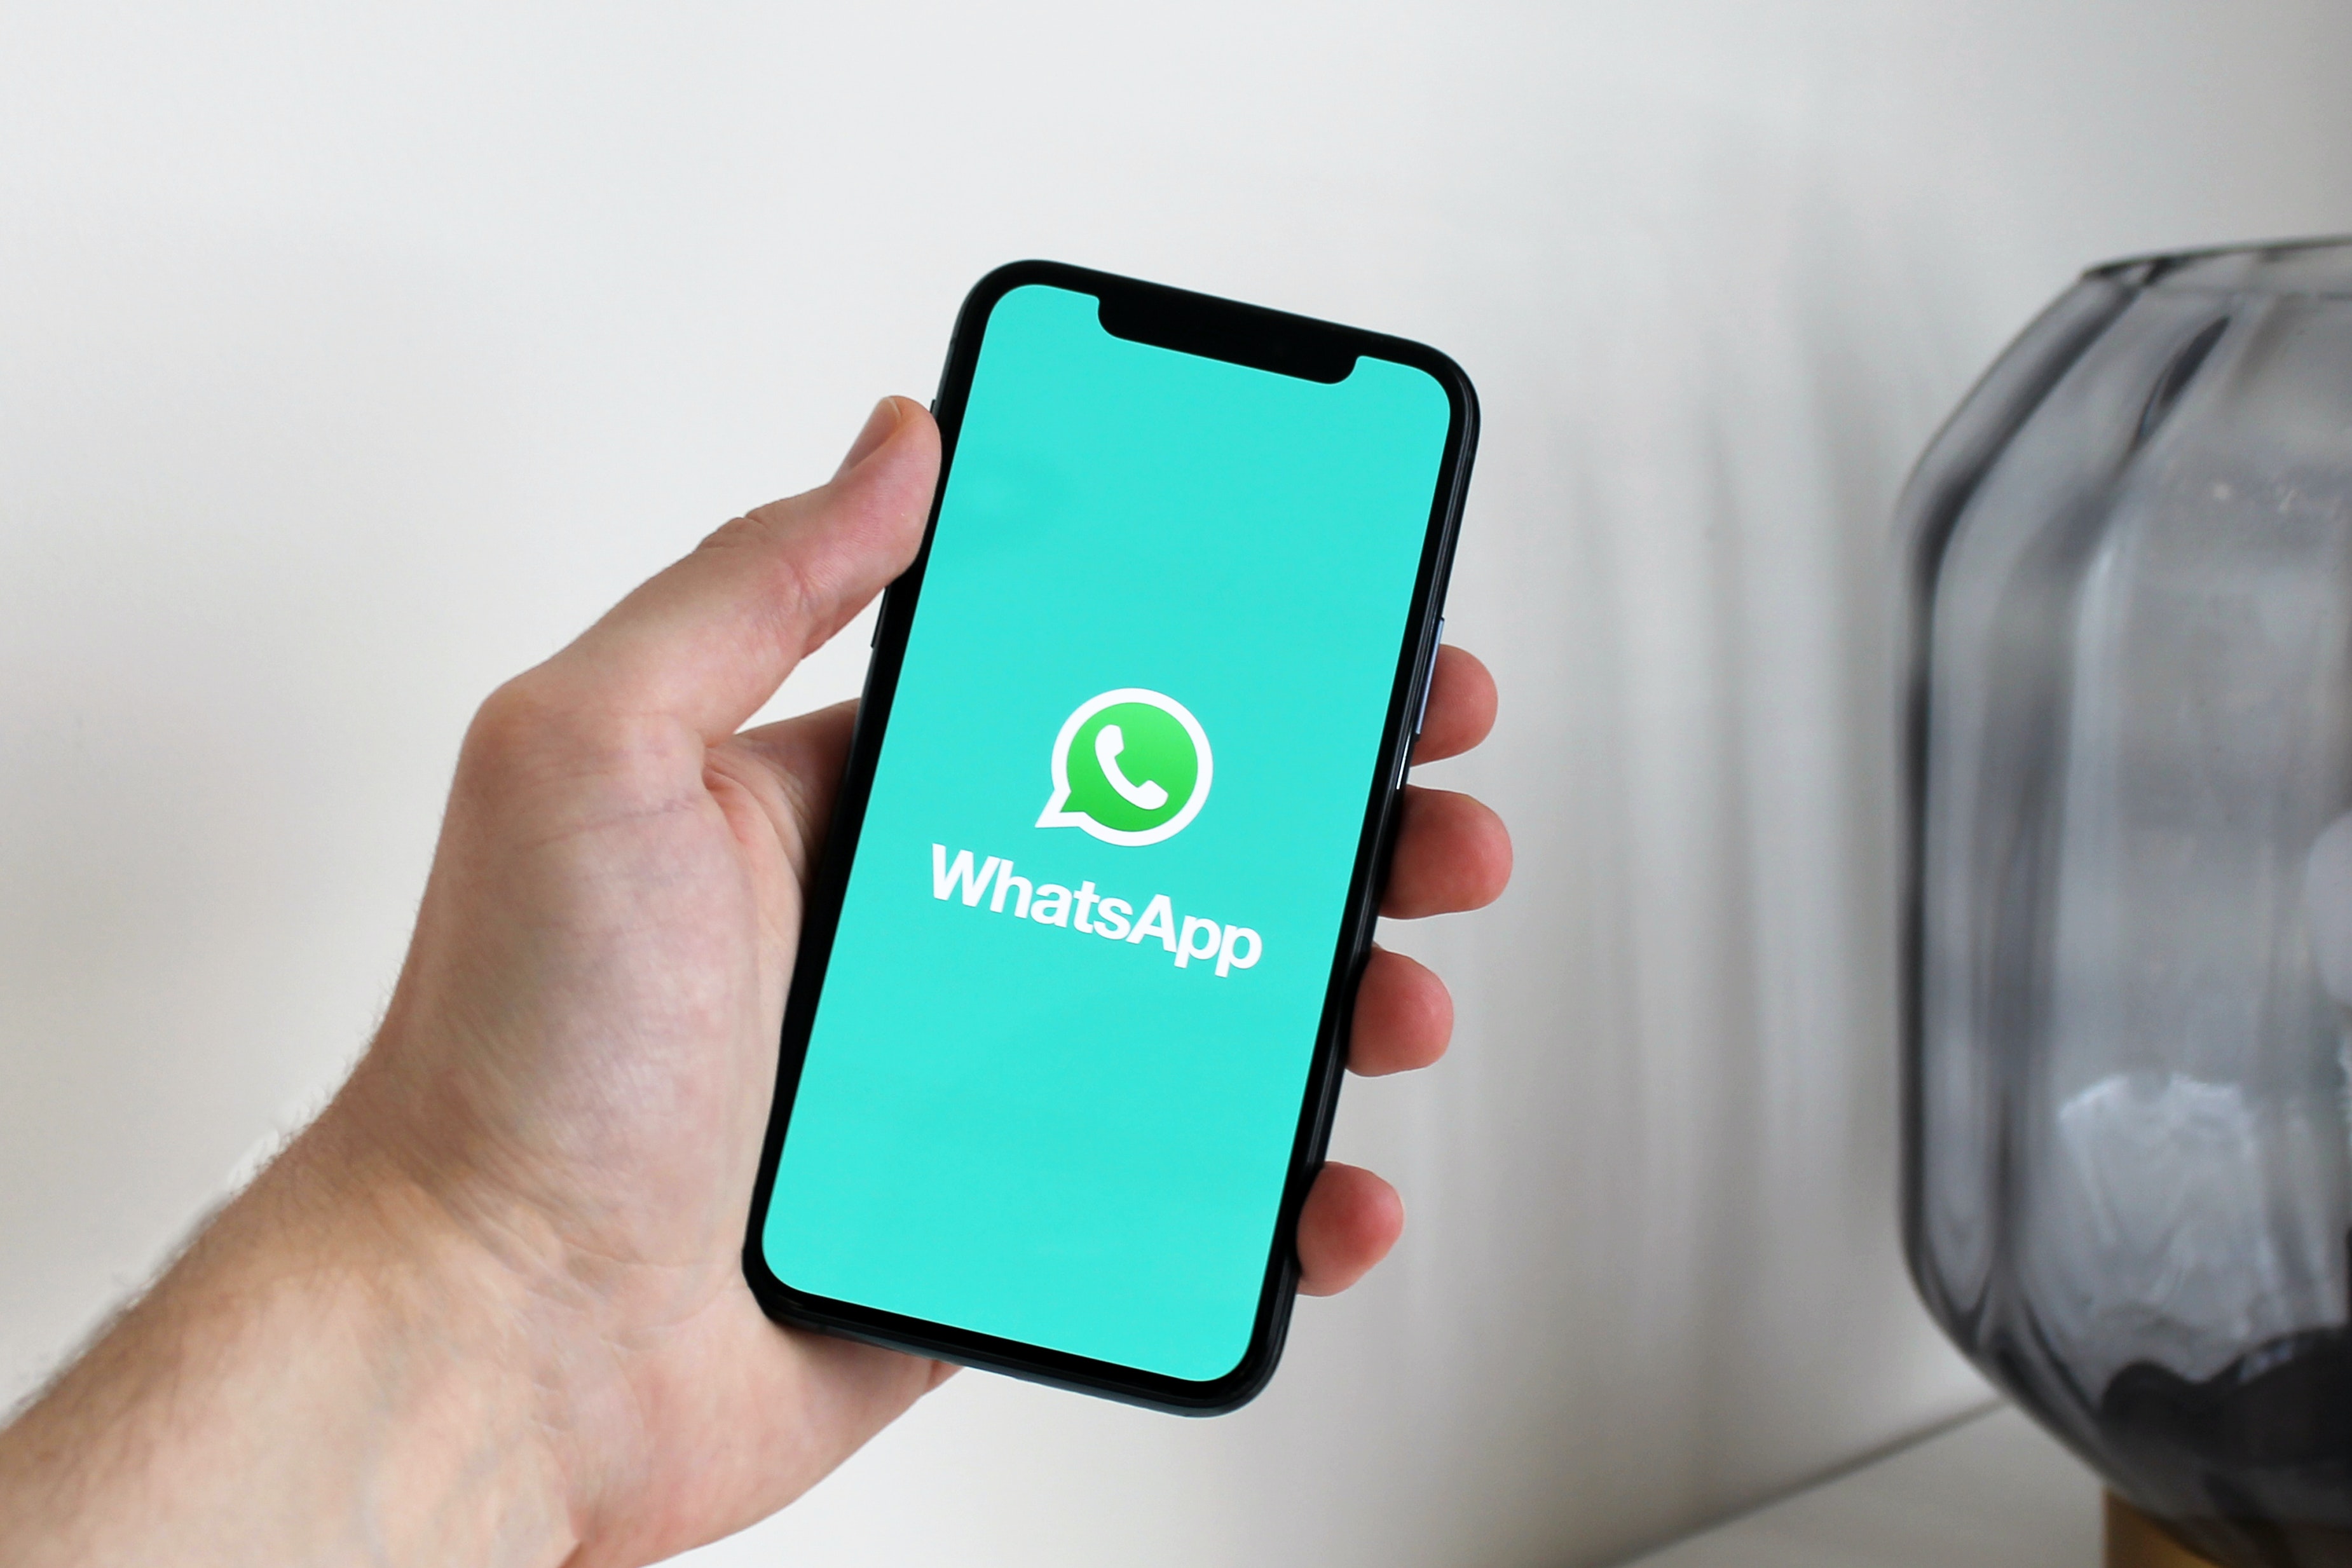 How to Use Two WhatsApp in One Phone?